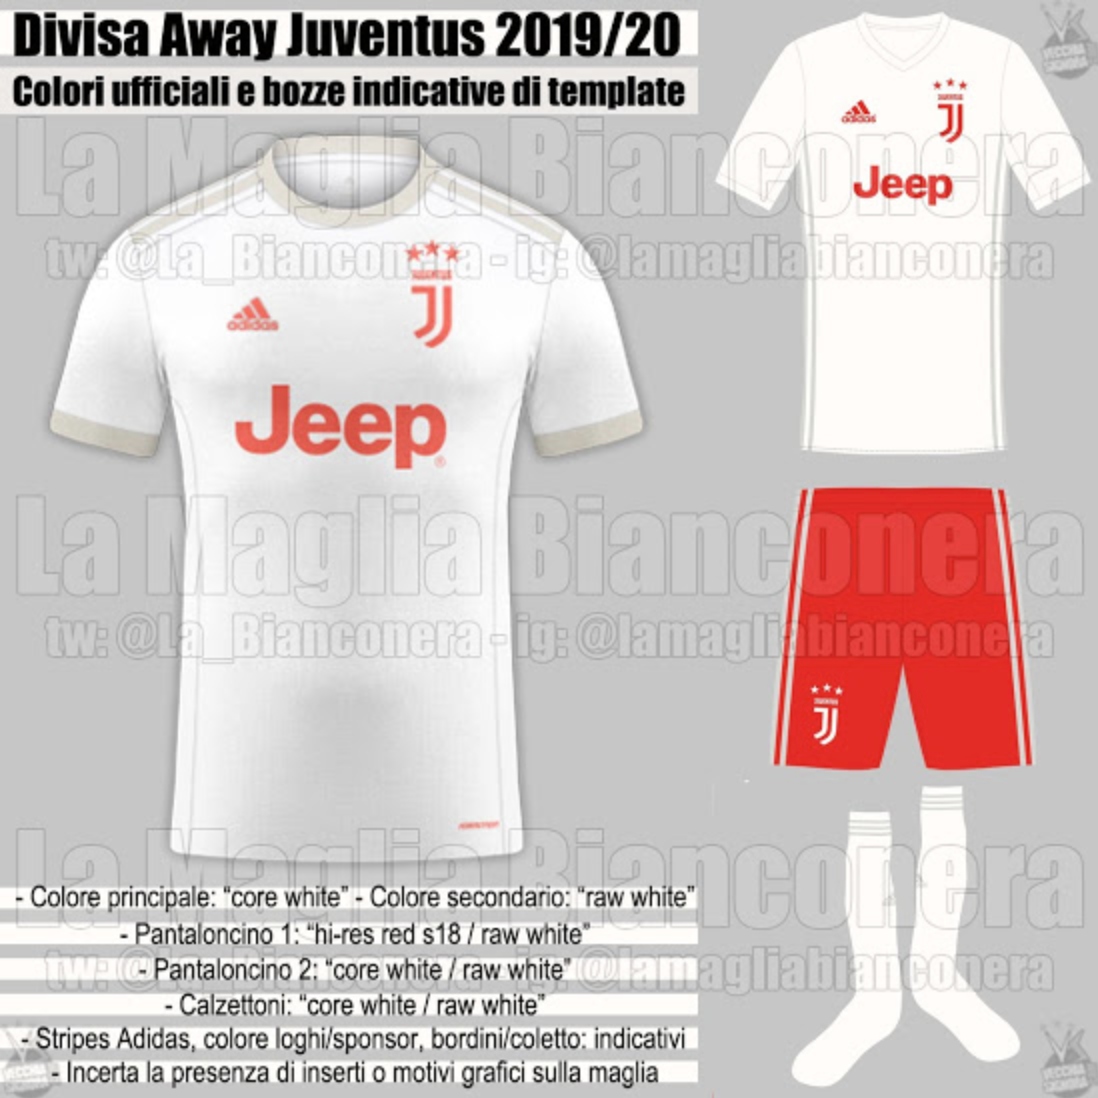 The Best And Worst Kits Ahead Of The 2019/2020 Season | Page 18 ...